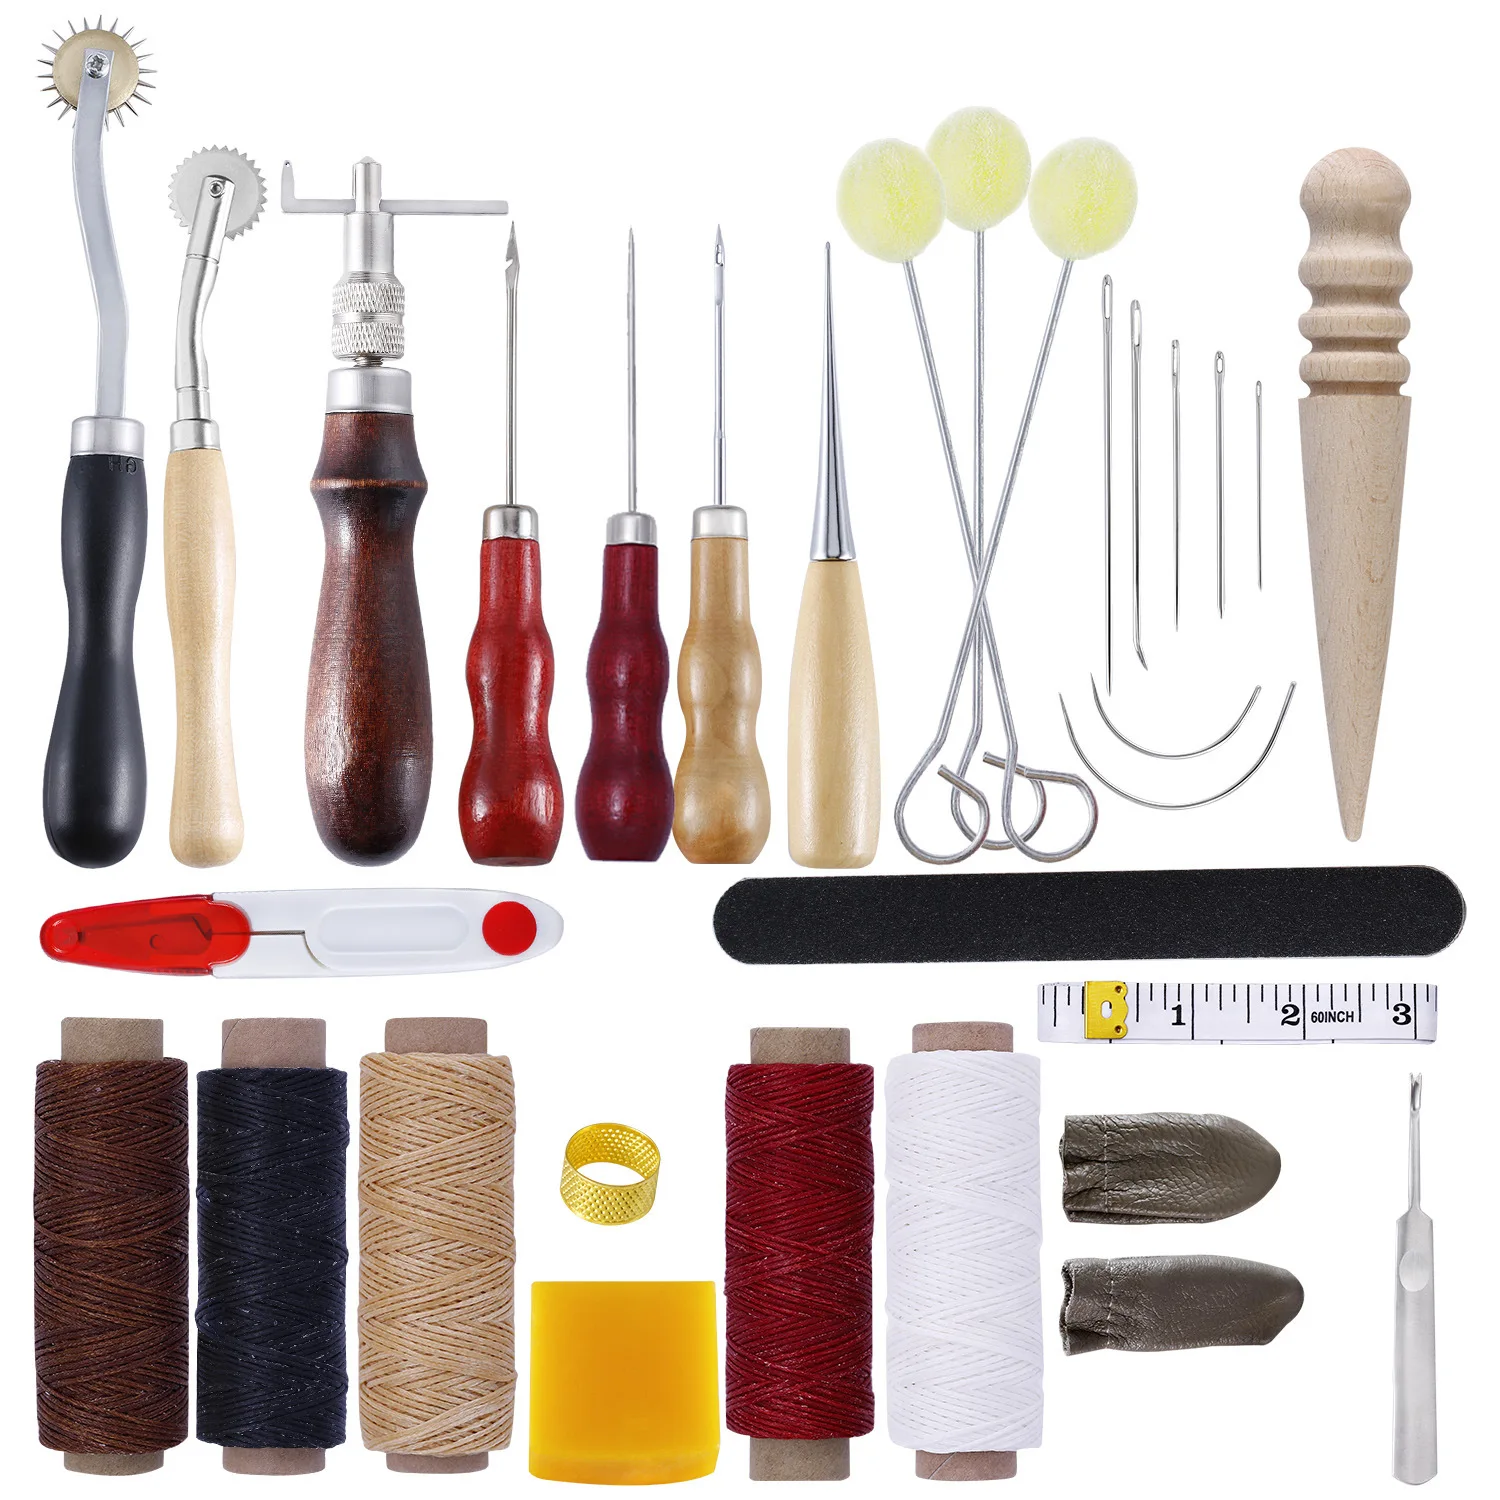 Professional Leather Craft Tools Kit Hand Sewing Stitching Punch Carving Work Saddle Set Accessories DIY Tool Set